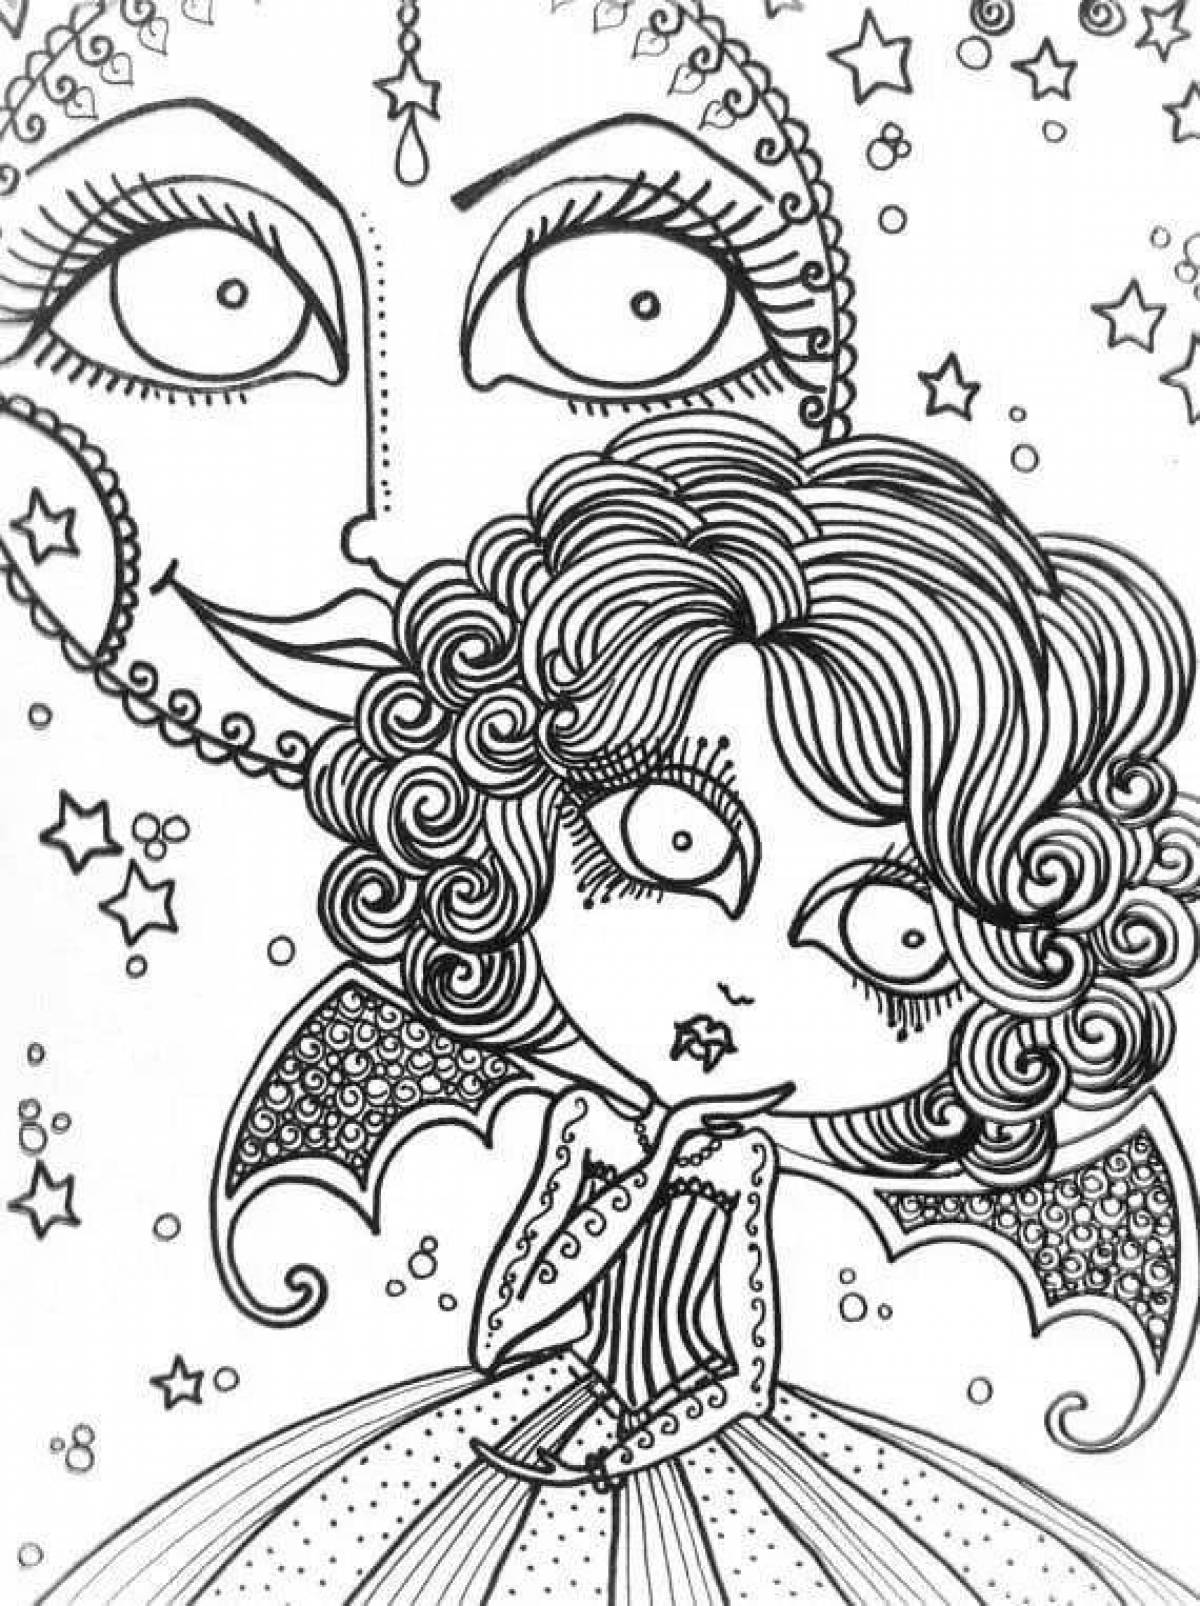 Coloring book scary but beautiful: sinister